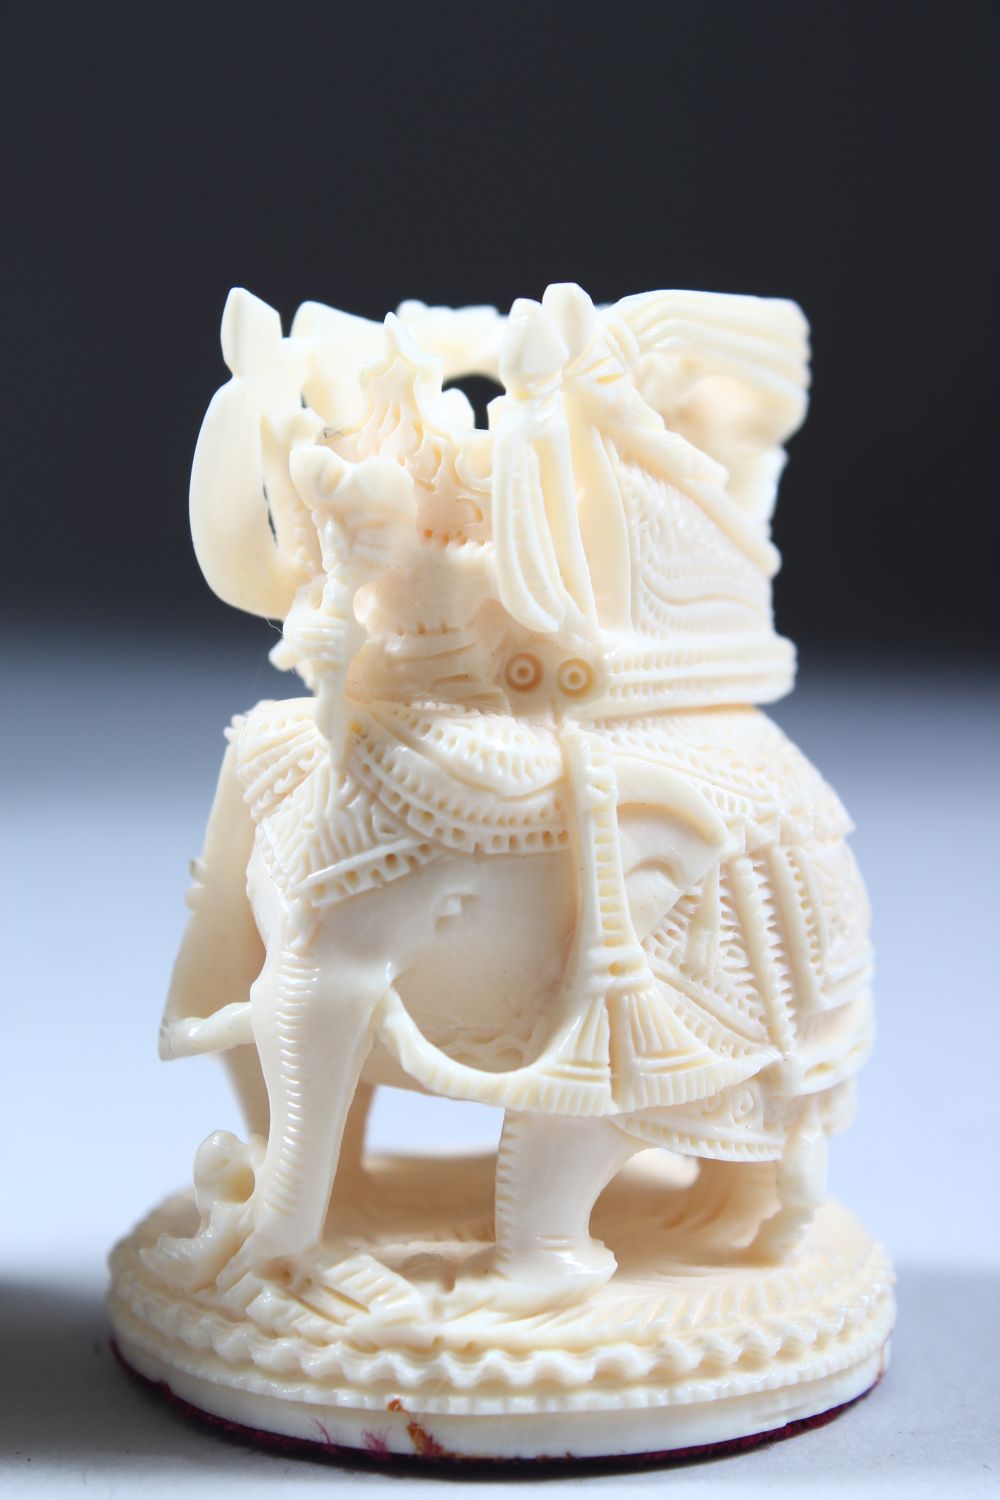 A GOOD 19TH / 20TH CENTURY INDIAN CARVED IVORY CHESS SET IN ORIGINAL BOX, from 10cm high down to 2. - Image 11 of 12